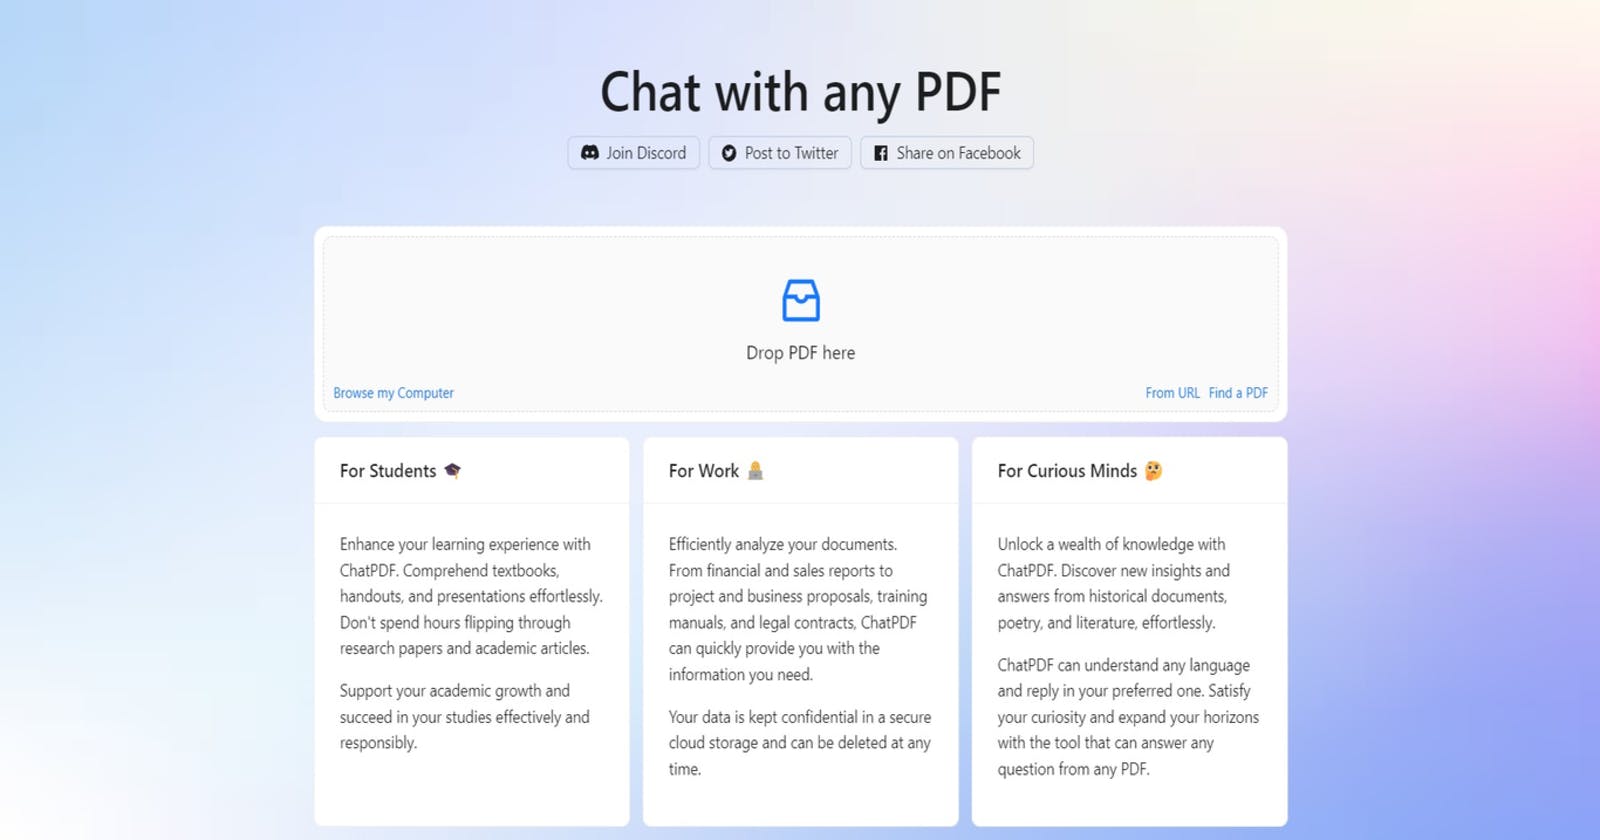 ChatPDF: Conversations that Bring PDFs to Life